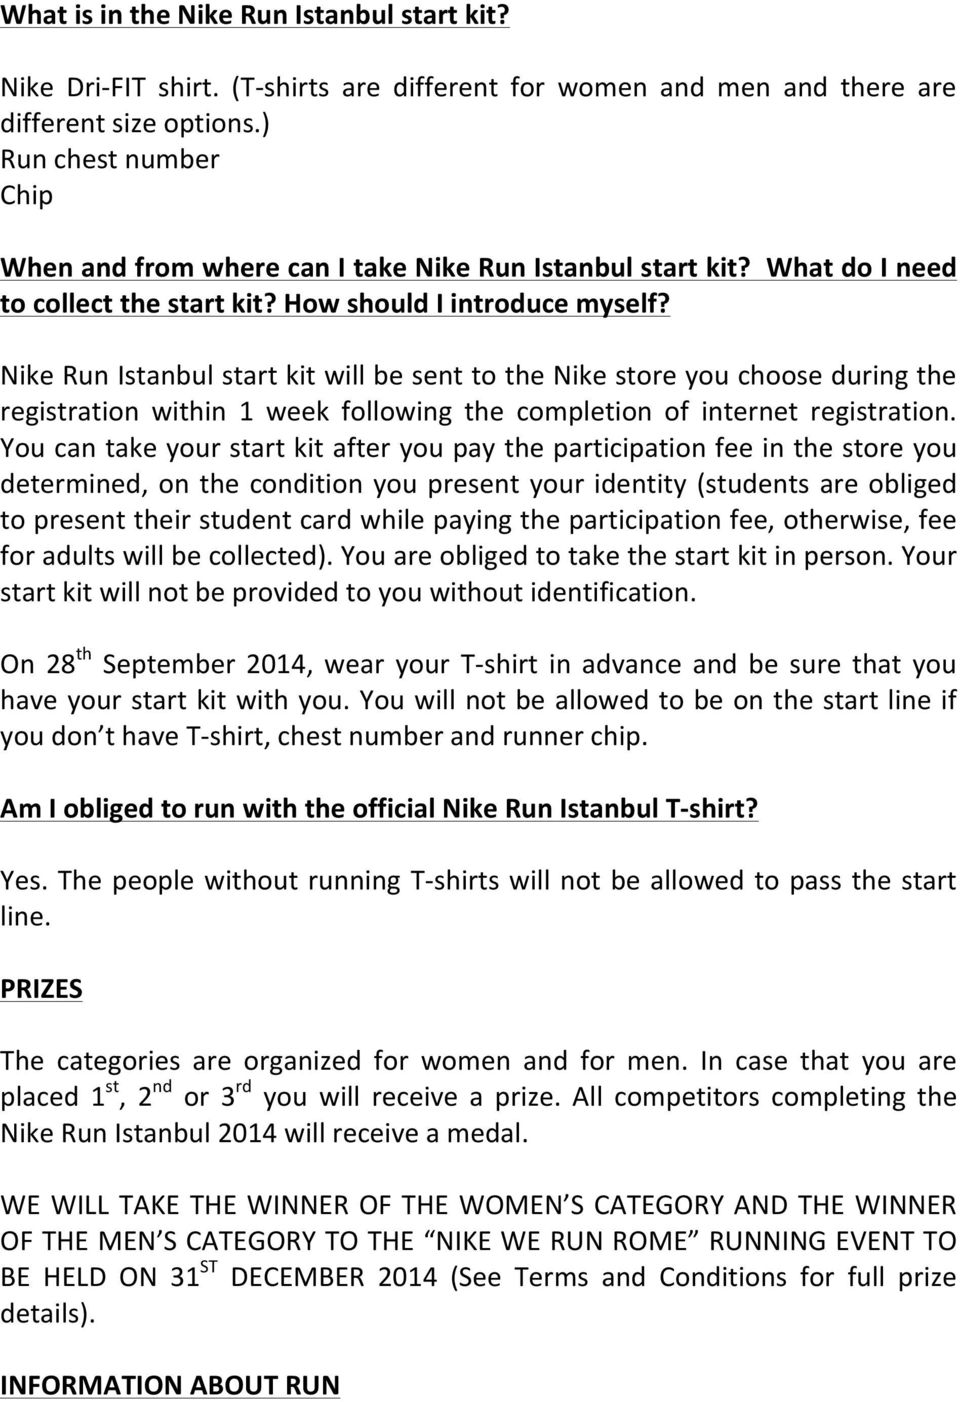 Nike Run Istanbul start kit will be sent to the Nike store you choose during the registration within 1 week following the completion of internet registration.